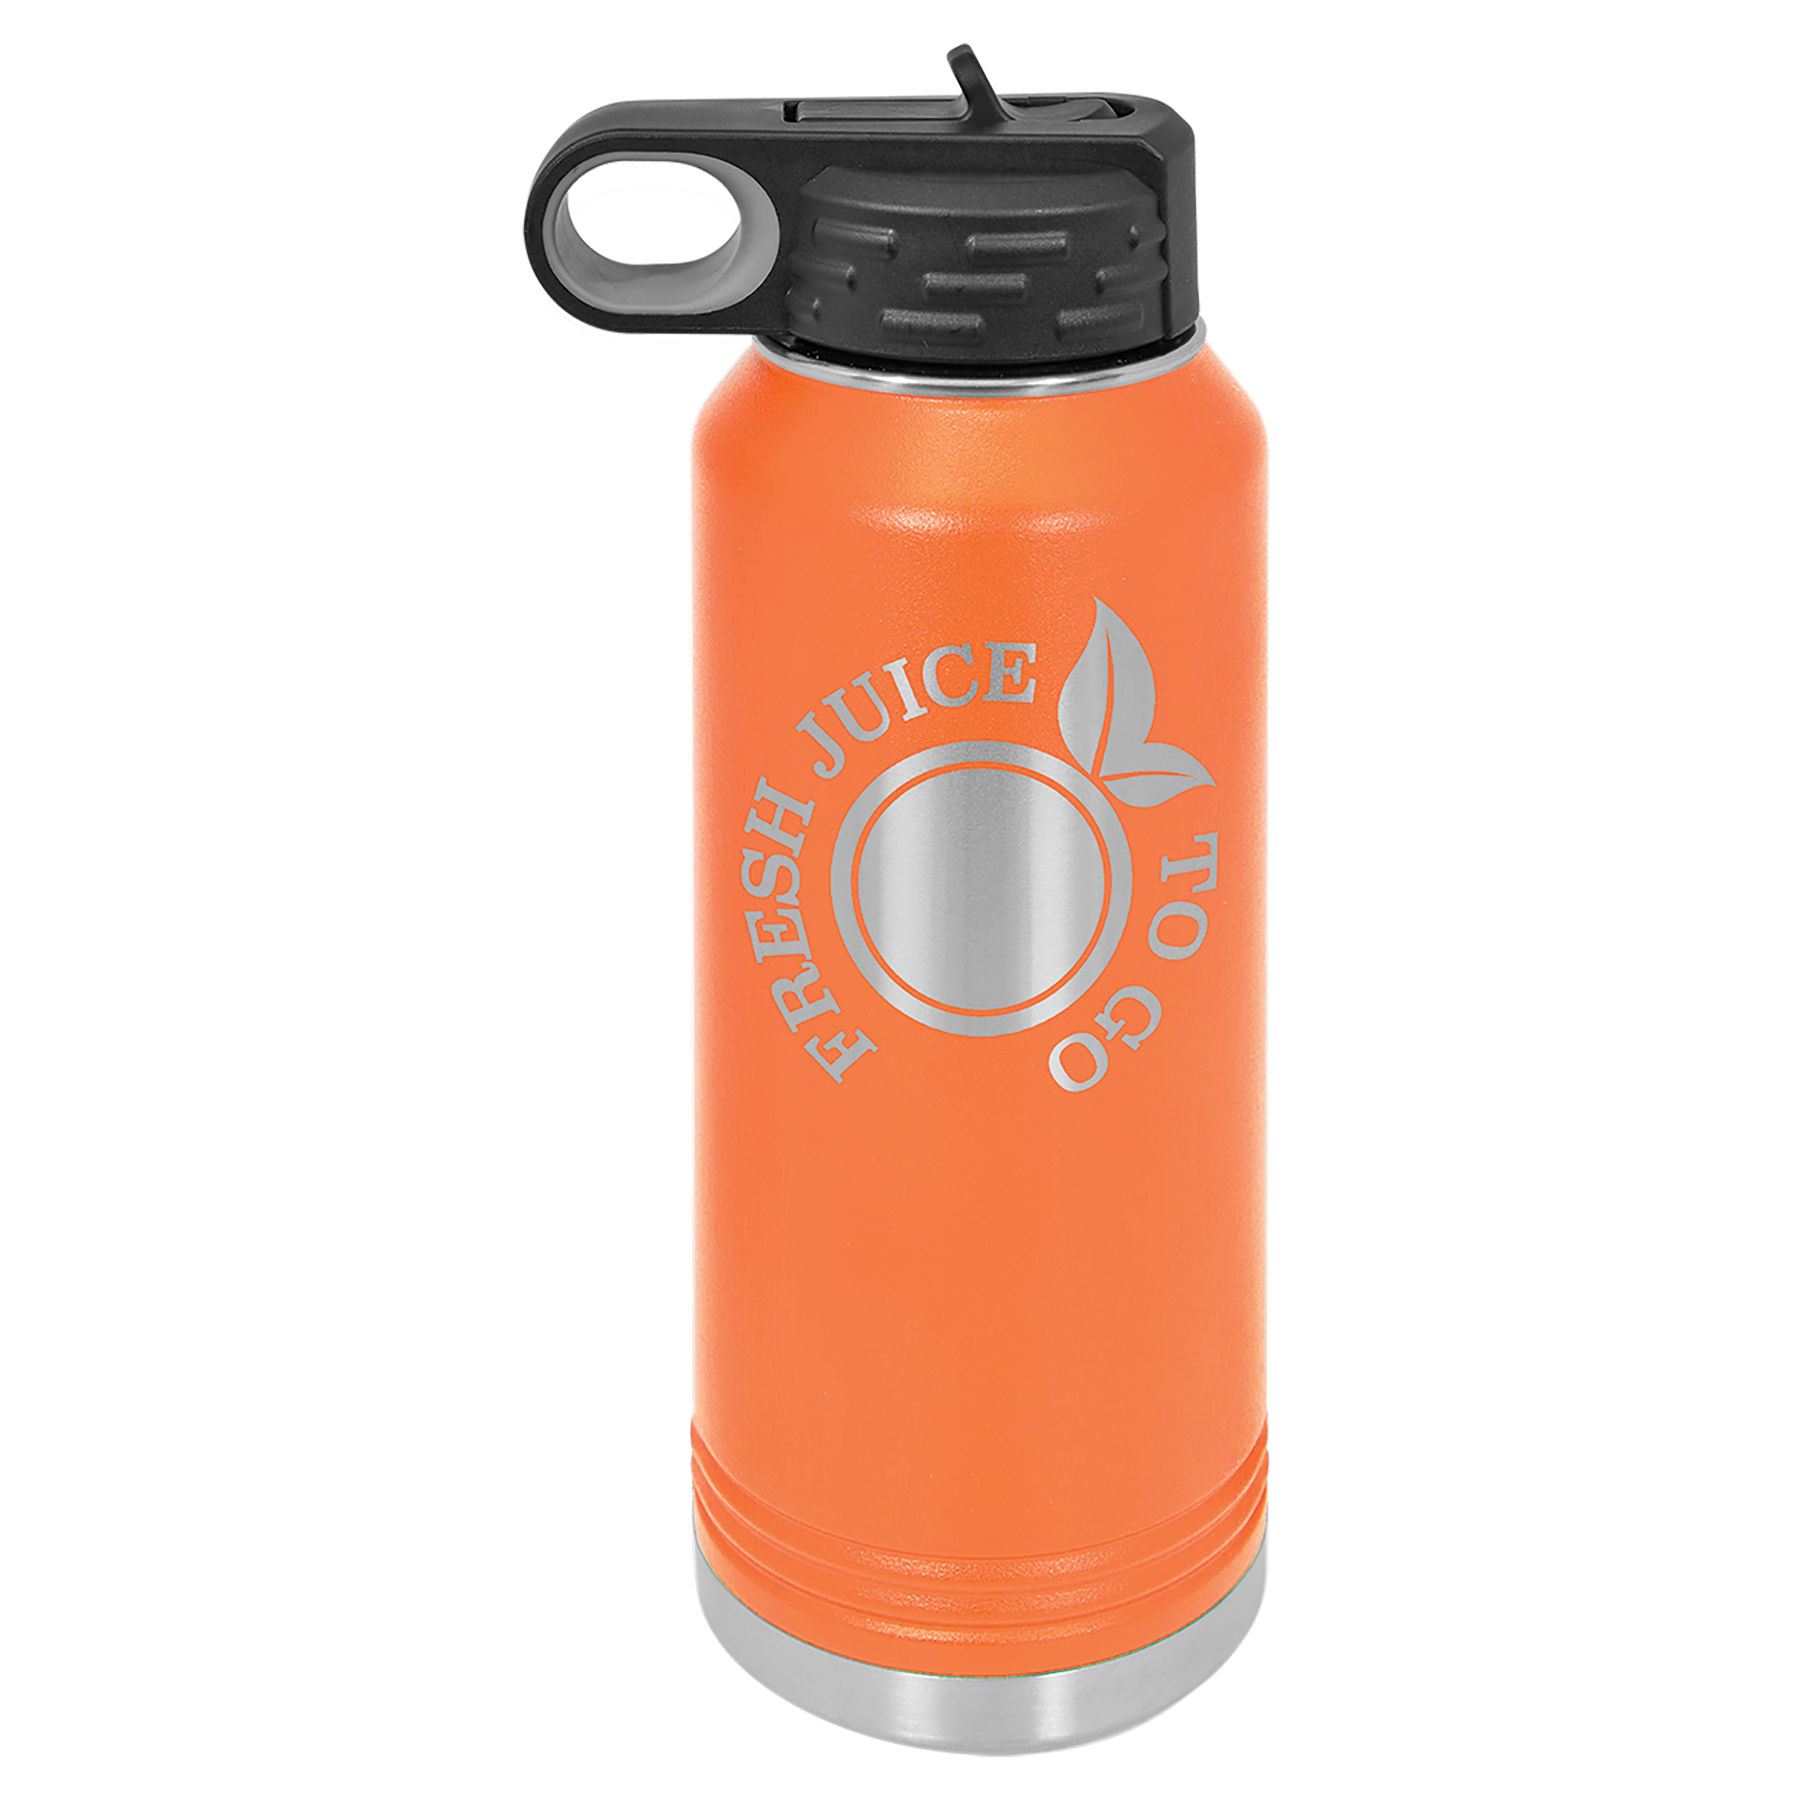 32 oz. Orange Stainless Steel Insulated Water Bottler.  Customizable with your personal image or saying.